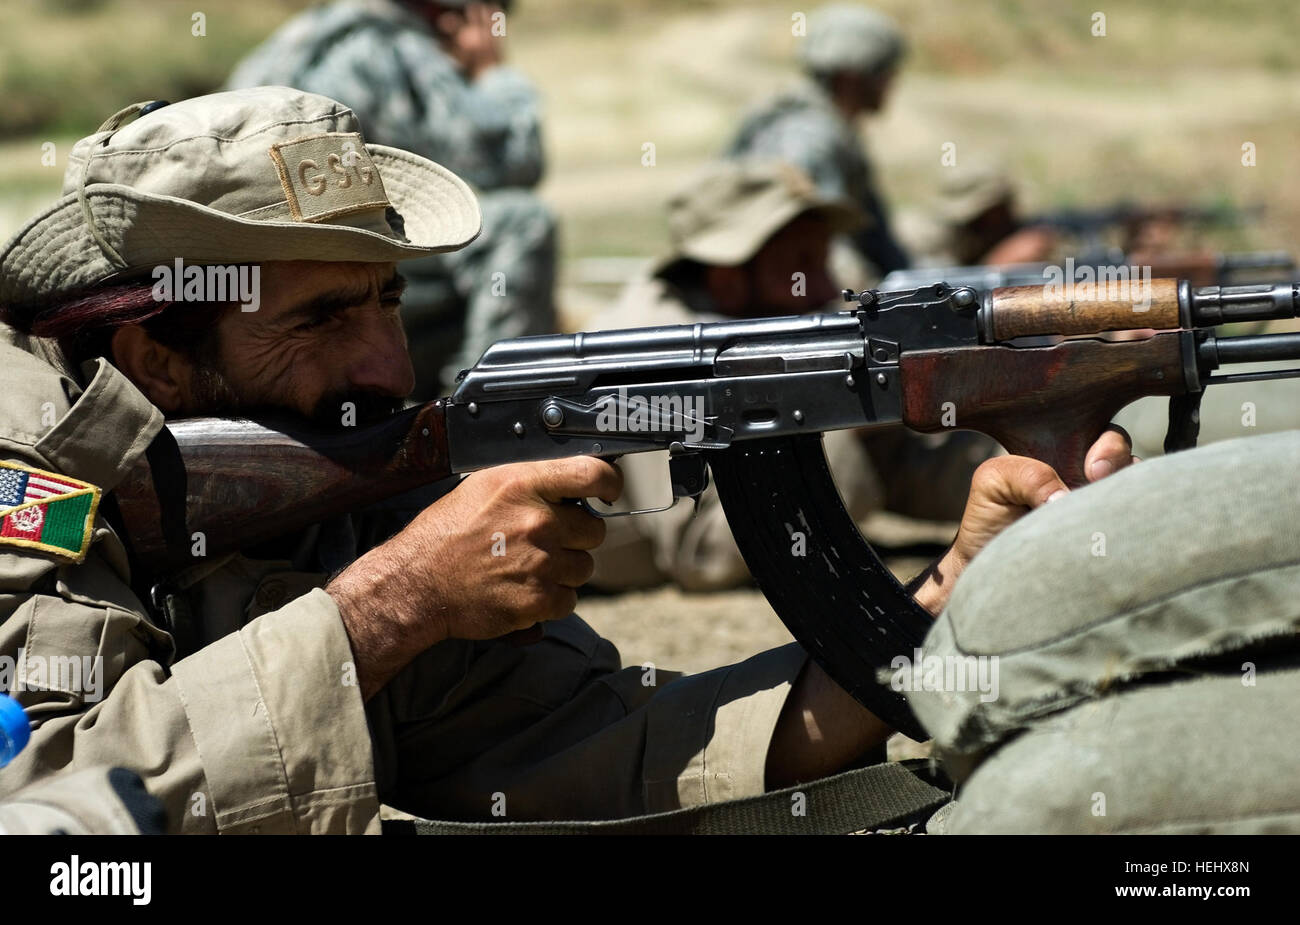 An Afghan security guard, assigned to Forward Operating Base Torkham, fires an AK-47 assault rifle while an American Soldier coaches him on proper shooting techniques during a weapons range hosted by the 527th Military Police Company, at FOB Torkham, in Afghanistan's Nangarhar province, May 12. U.S. hosts weapons range for Afghan Security Guards 171763 Stock Photo